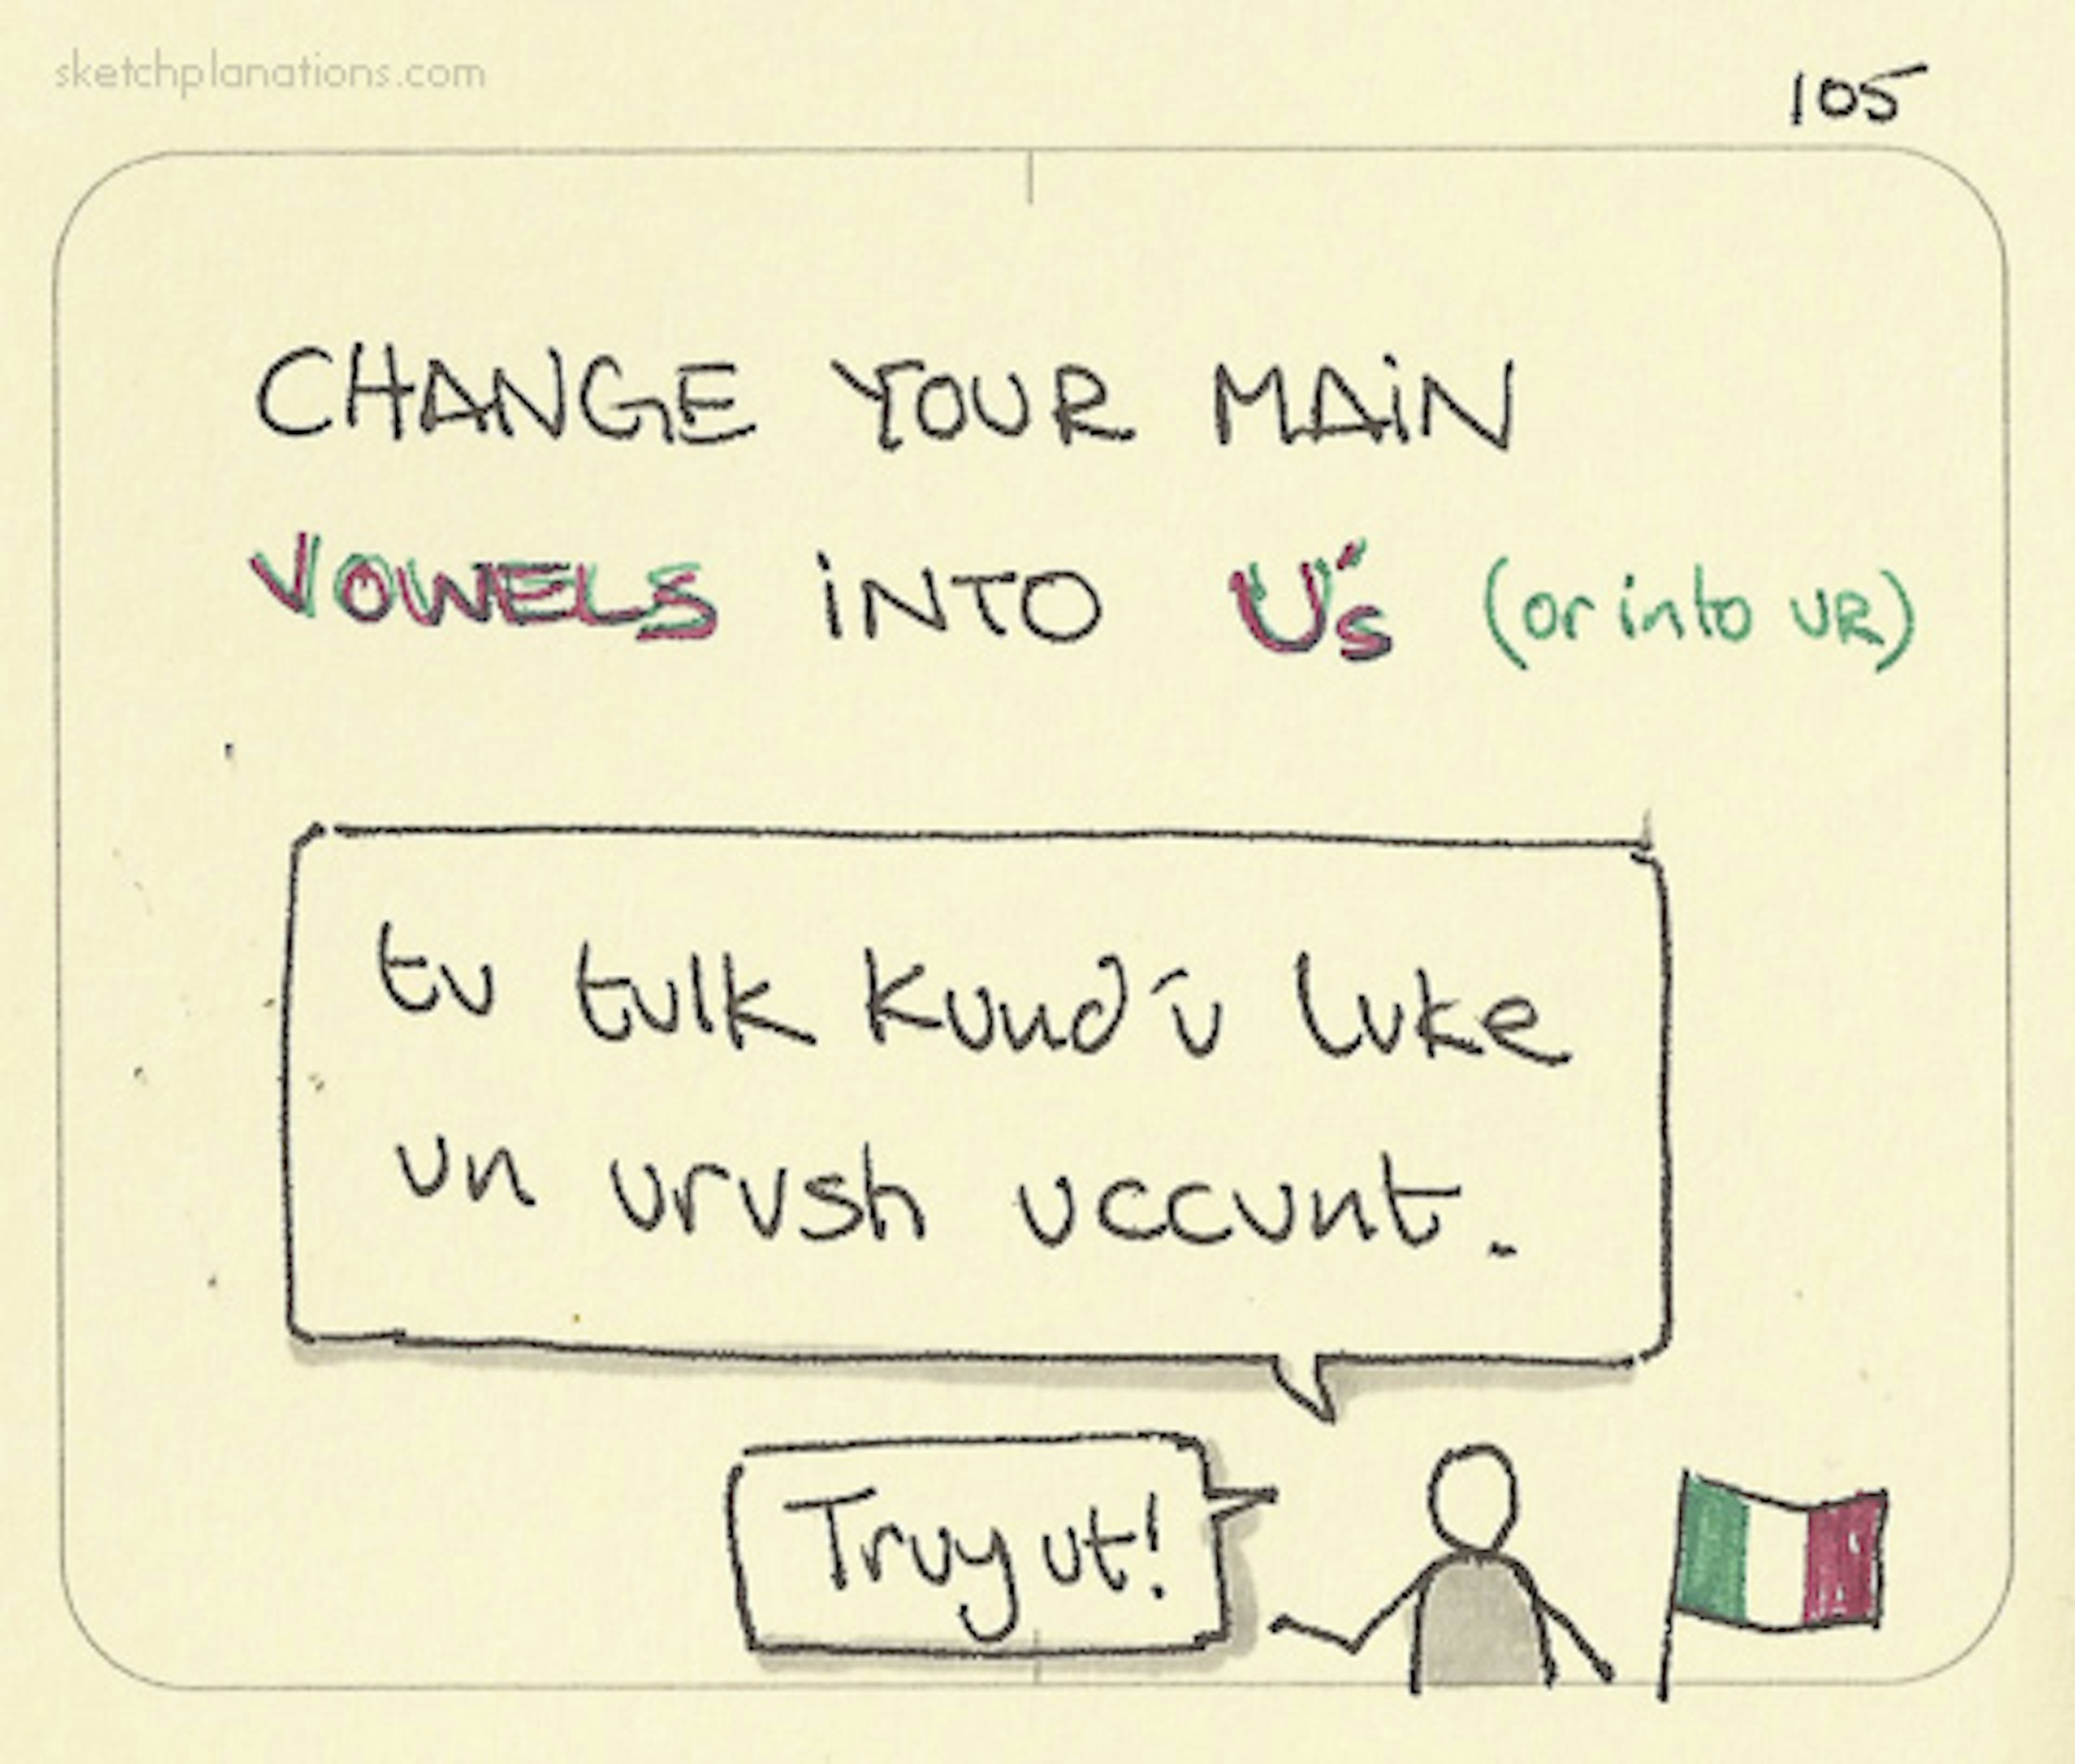 Change your main vowels into u’s and talk more Irish - Sketchplanations